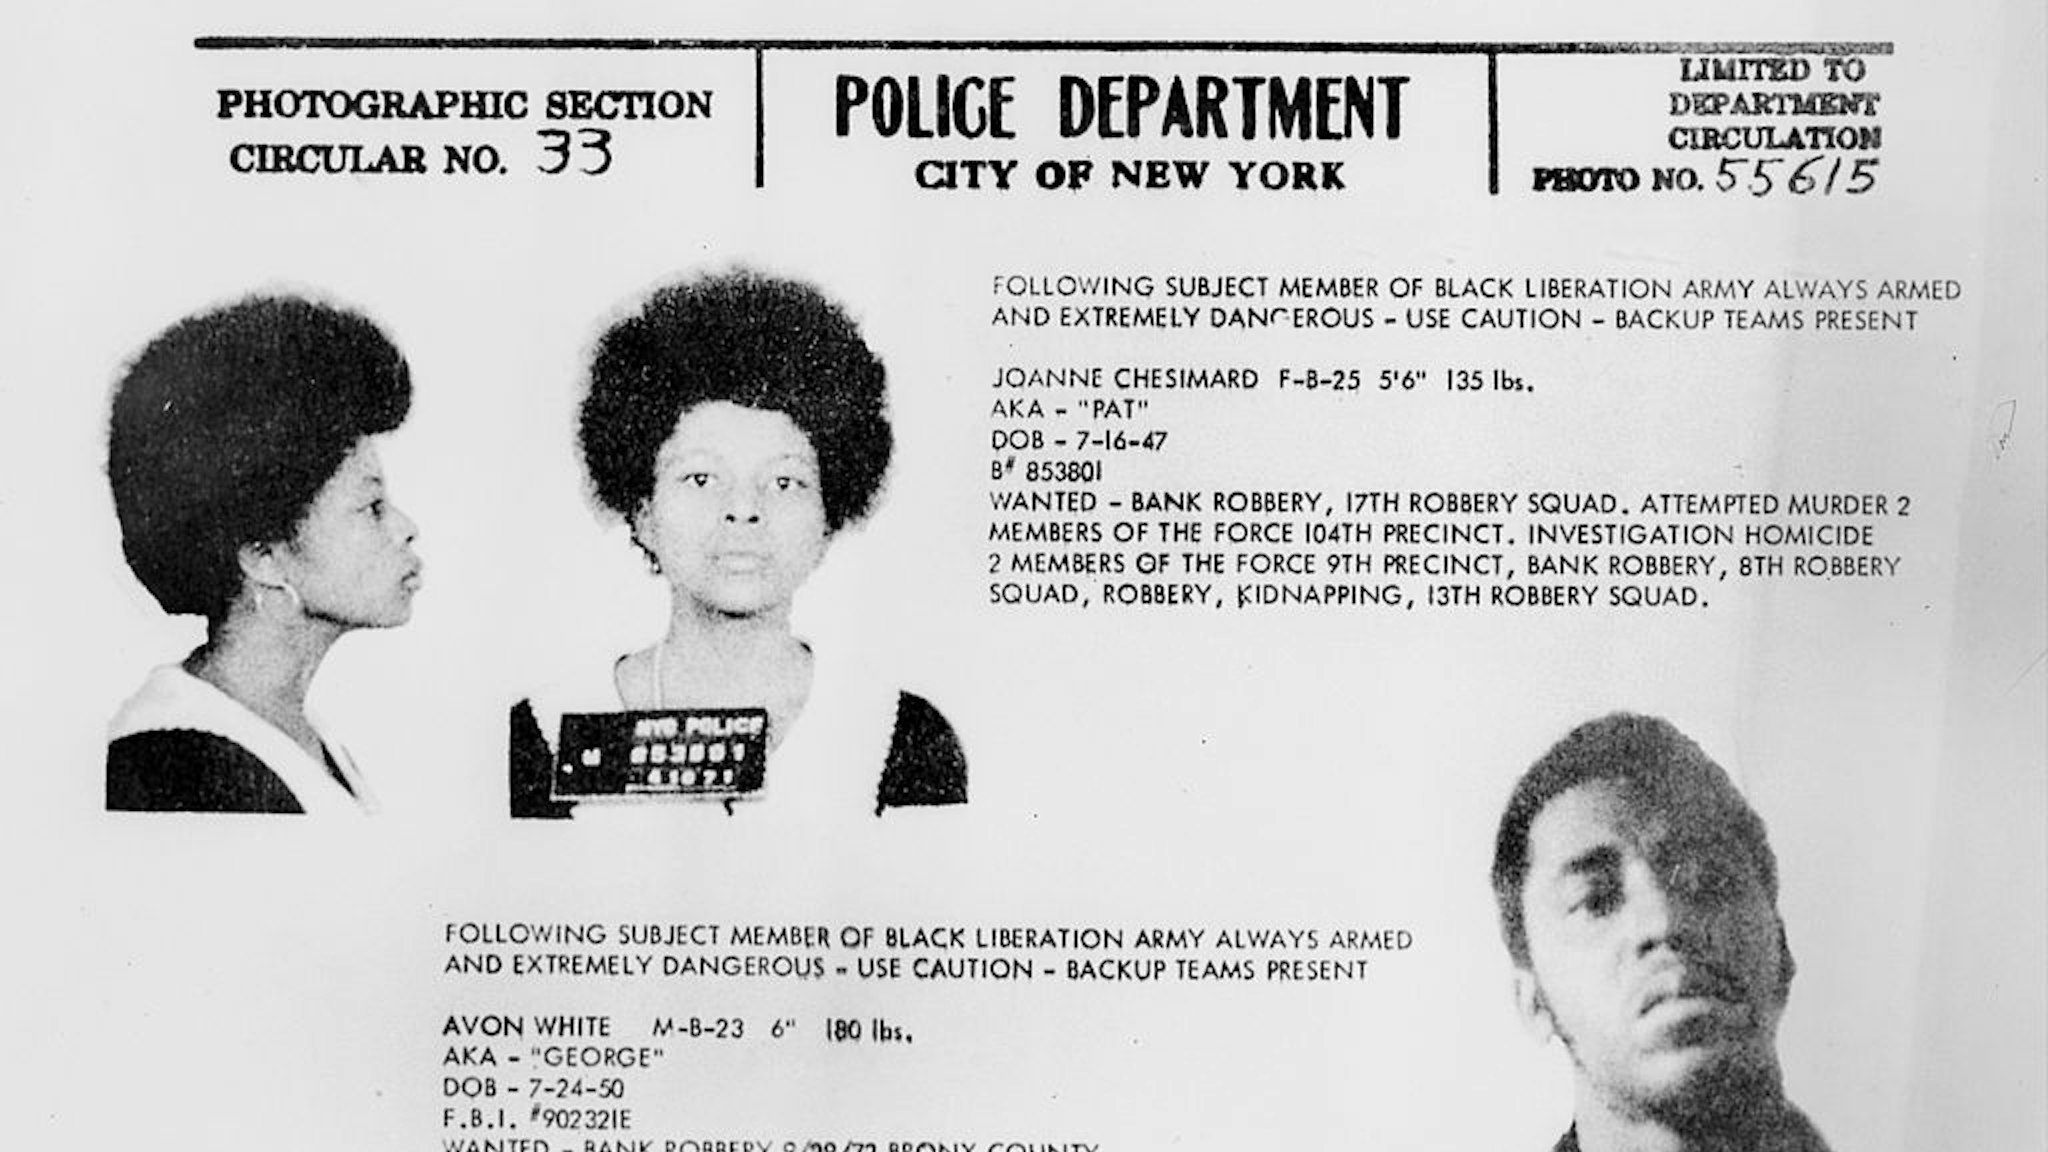 JoAnne Chesimard, member of the Black Liberation Army. Police wanted poster for Bank Robbery, 17th Robbery Squad, attempted murder 2 members of the police 104th precinct, investigation homicide 2 members of the force 9th precinct, bank robbery, 8th robbery squad, robbery, kidnapping, 13th robbery squad.